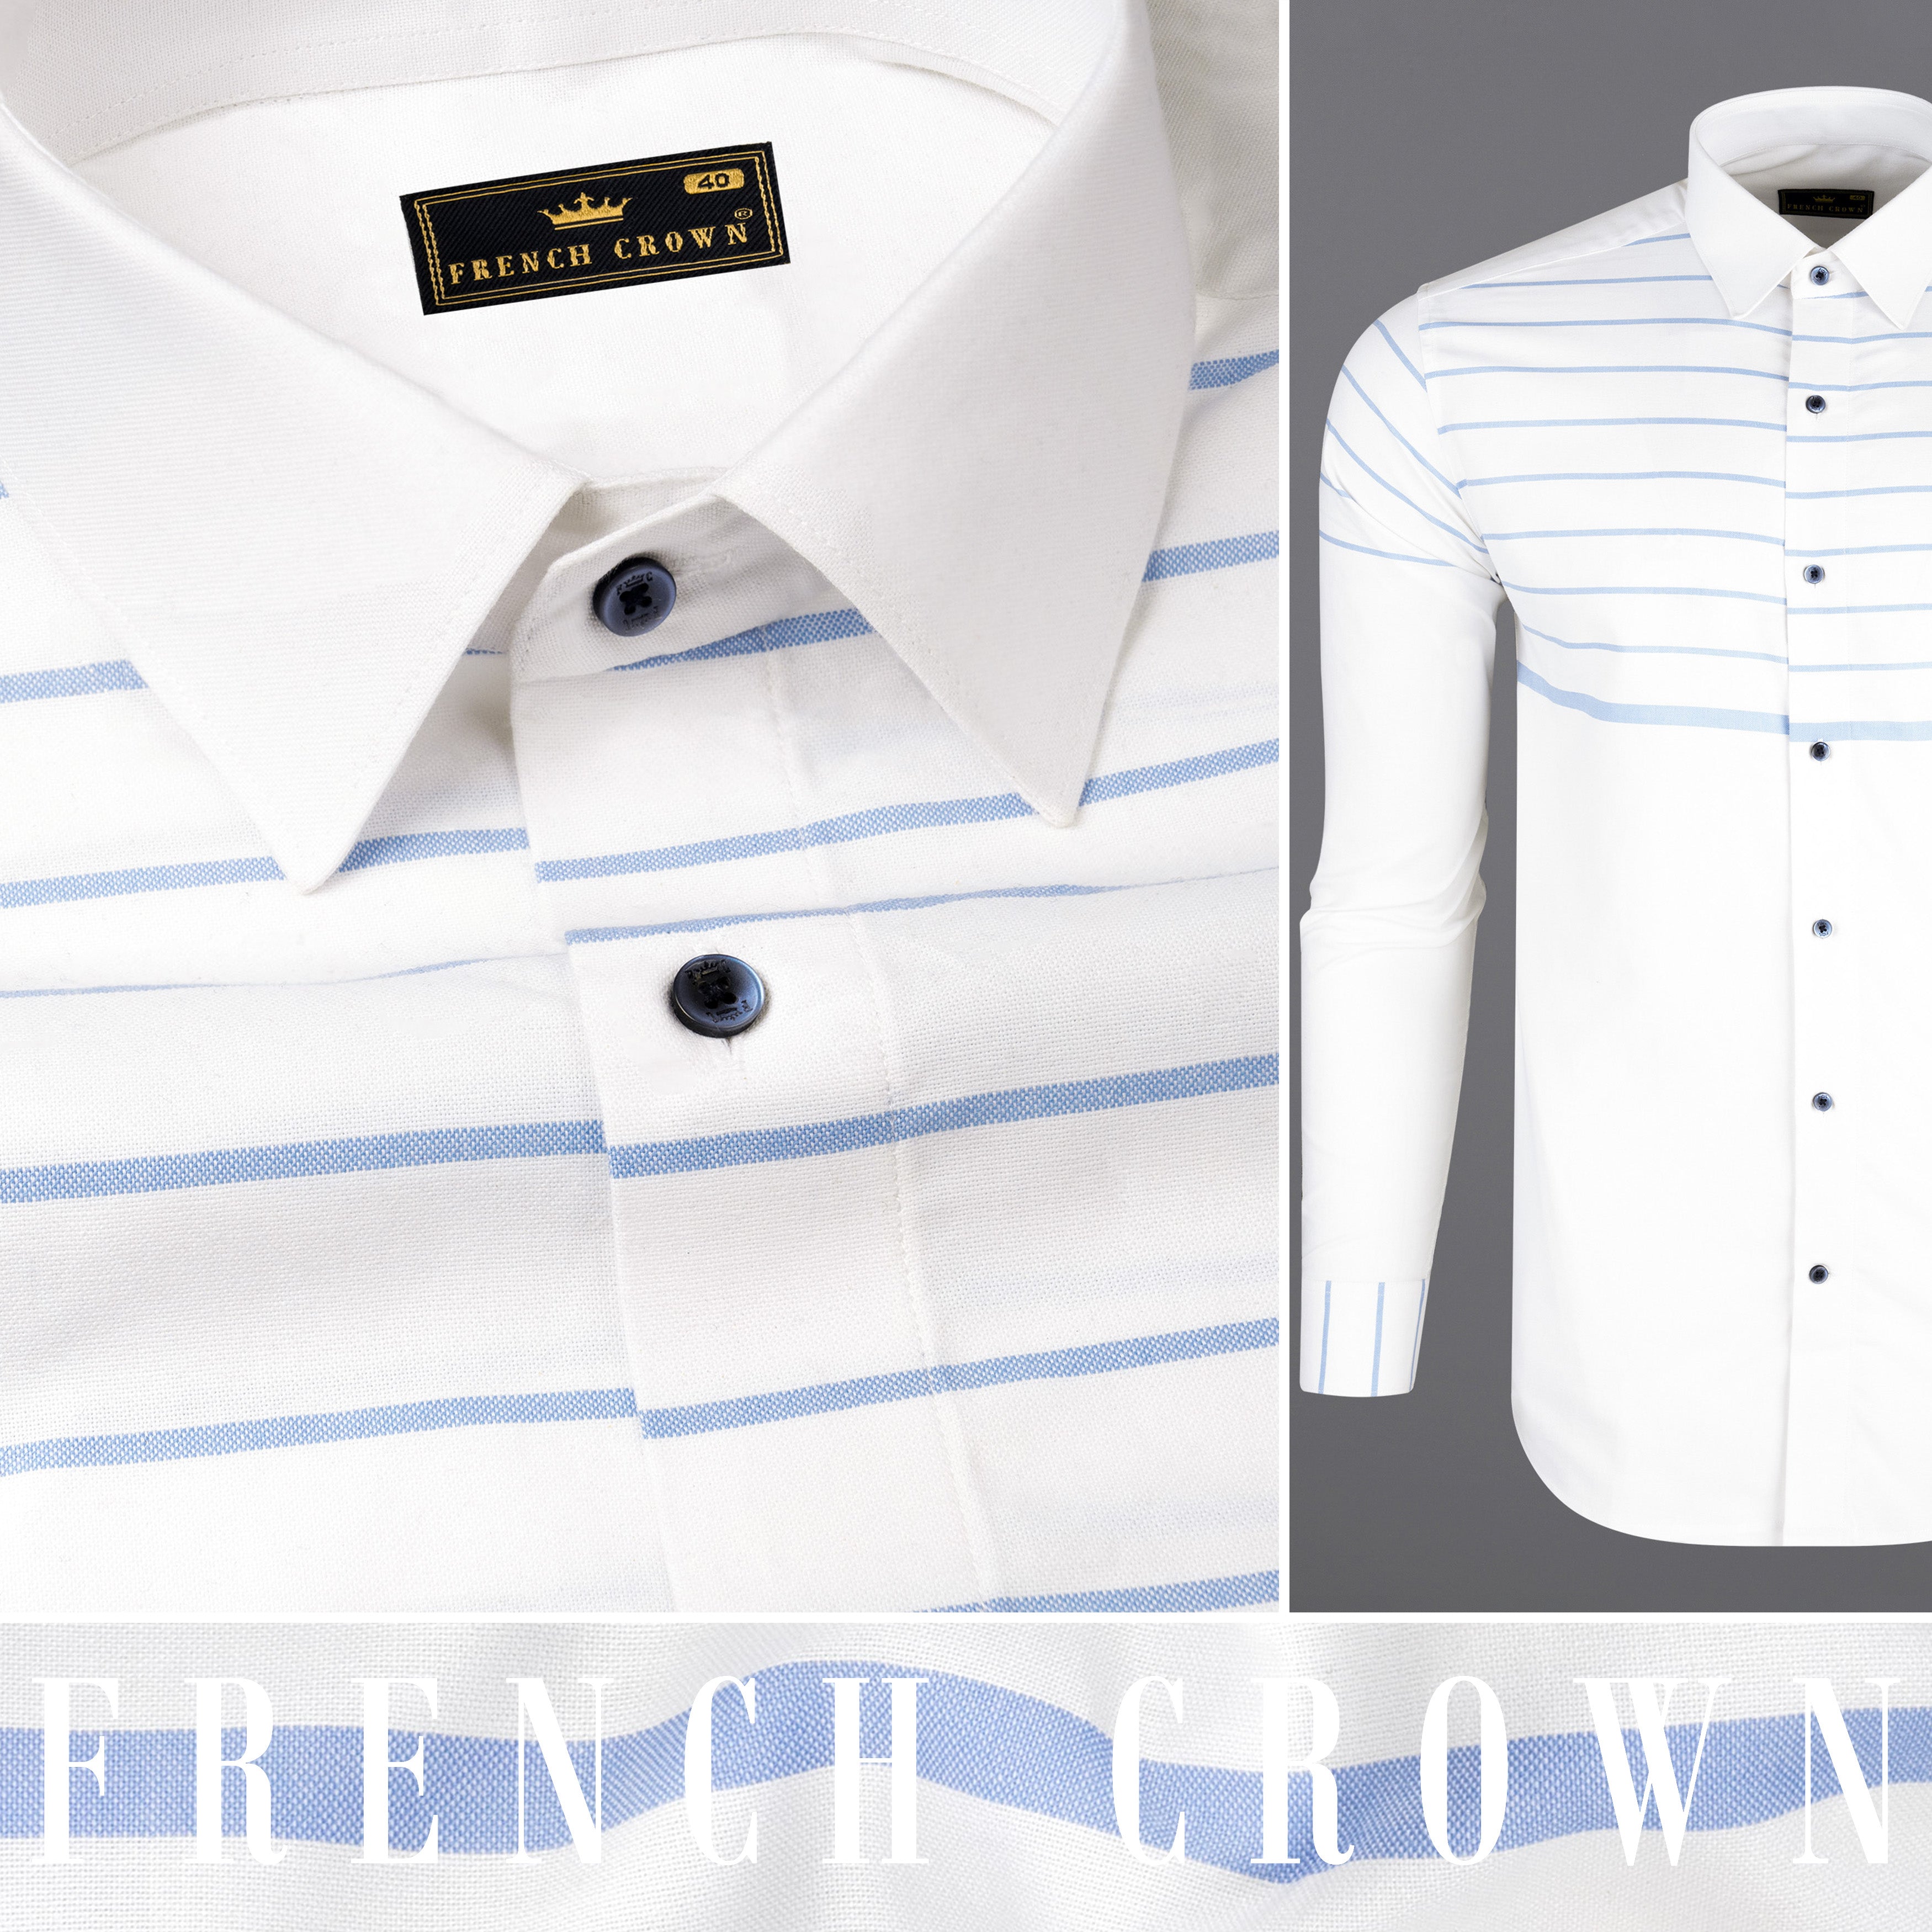 Bright White and Pale Cerulean Blue Horizontal Striped Royal Oxford Shirt